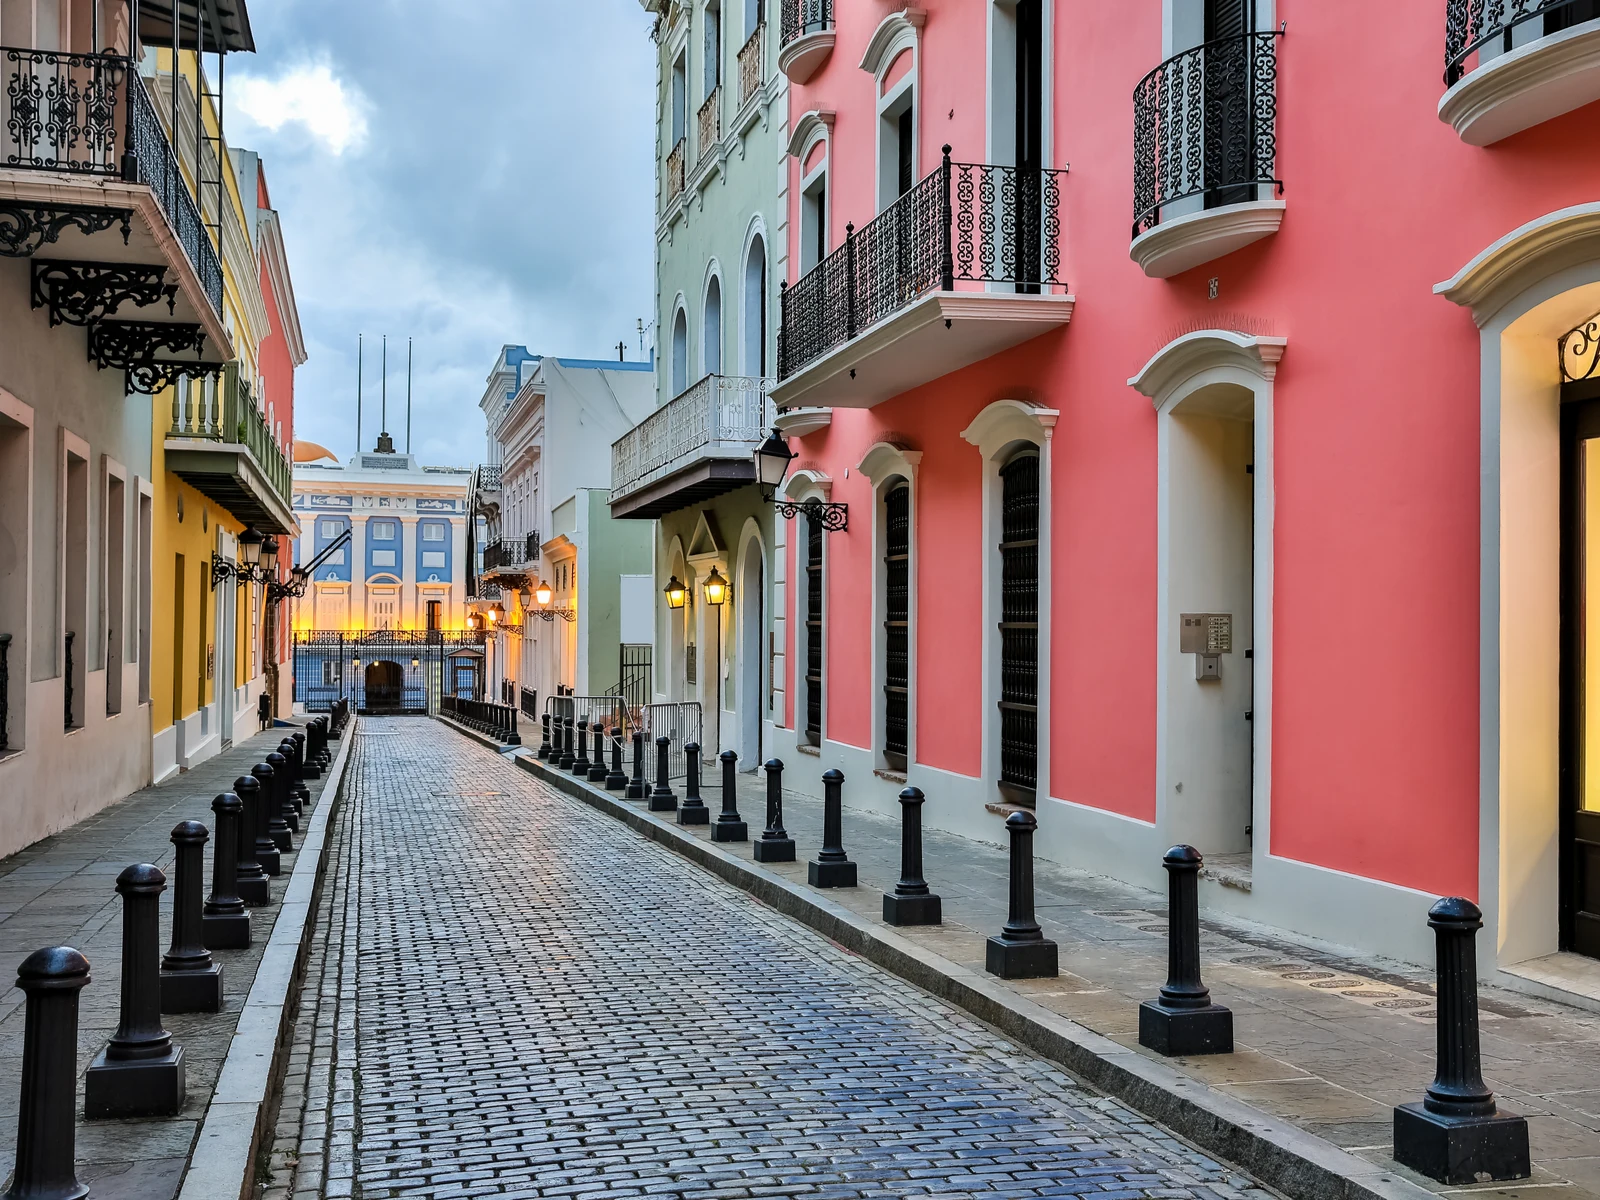 A brick street in Old San Juan, one of the best places to visit in Puerto Rico, with evenly spaced bollards beside vibrant structures